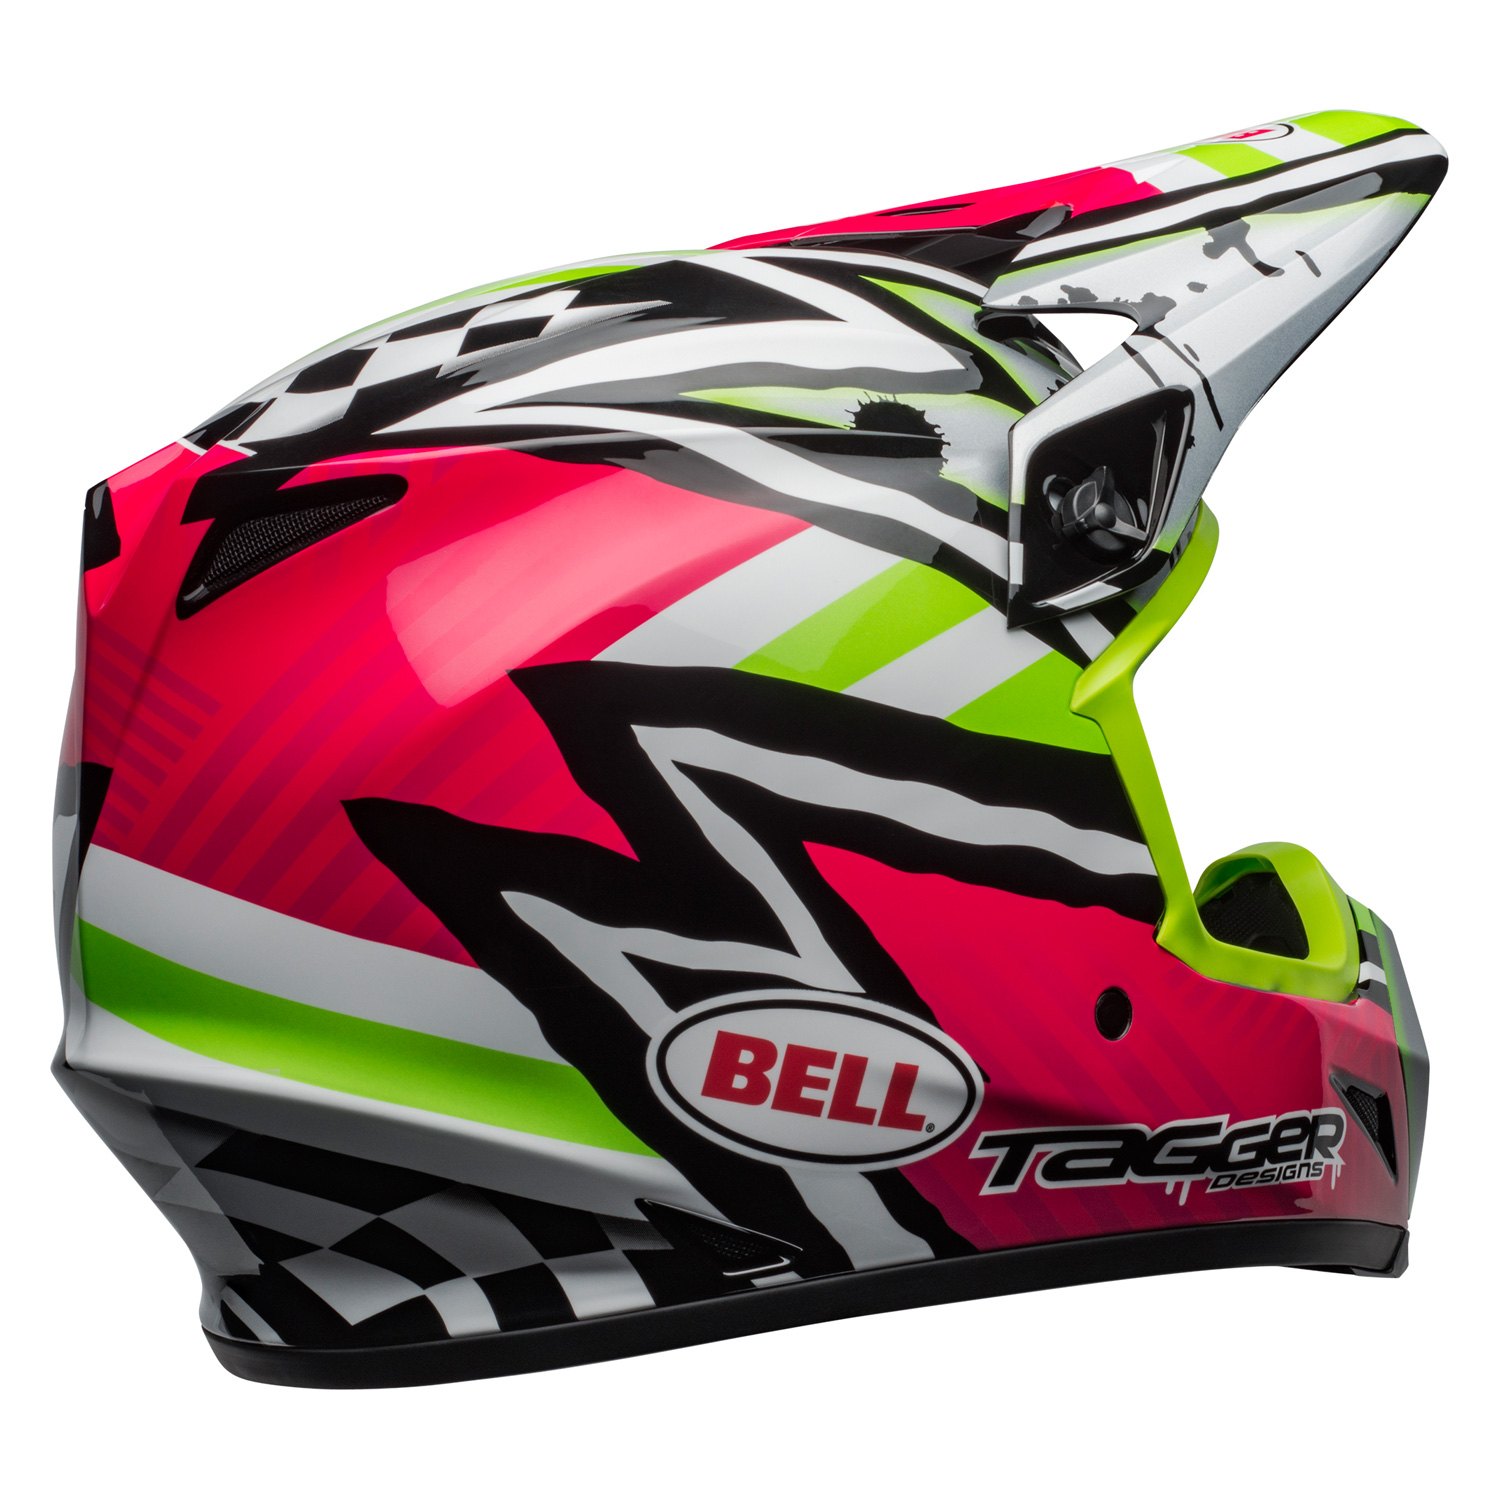 TAGGER ASYMETRIC PINK GREEN with 100% Goggles BELL MX-9 MIPS MOTOCROSS HELMET